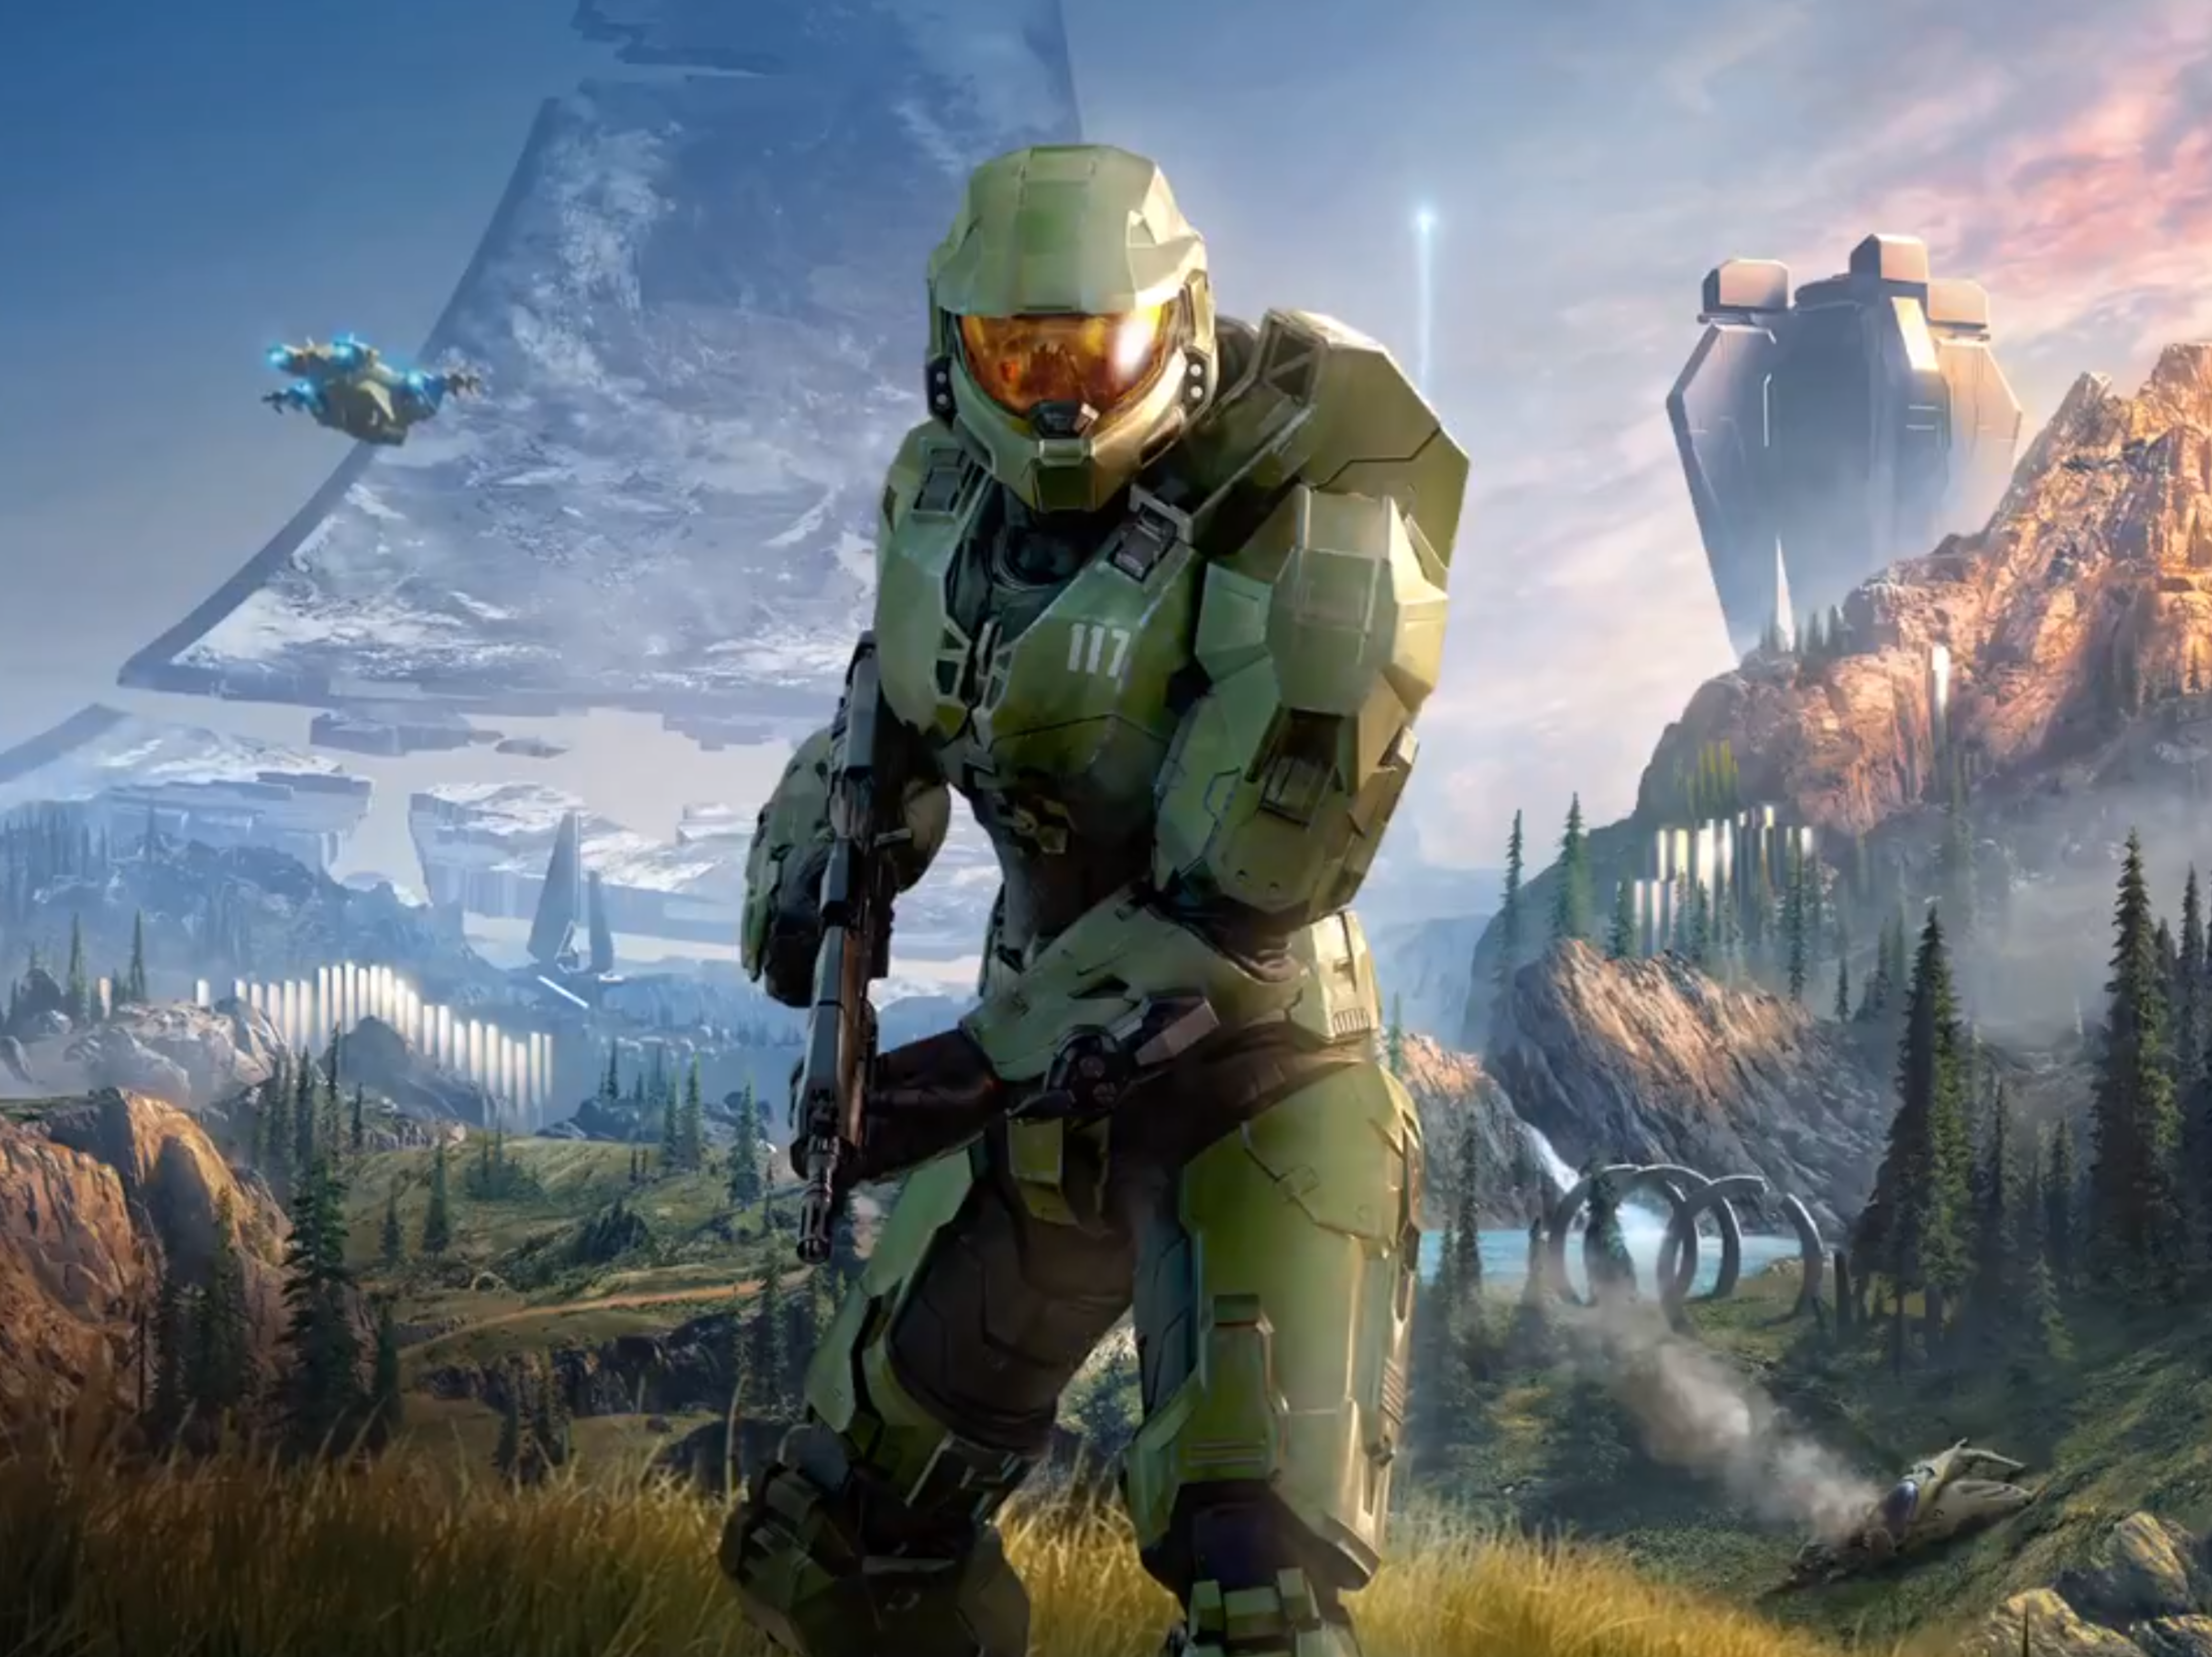 Halo Infinite to support Cross-Play and Cross-Progression “As it should be”